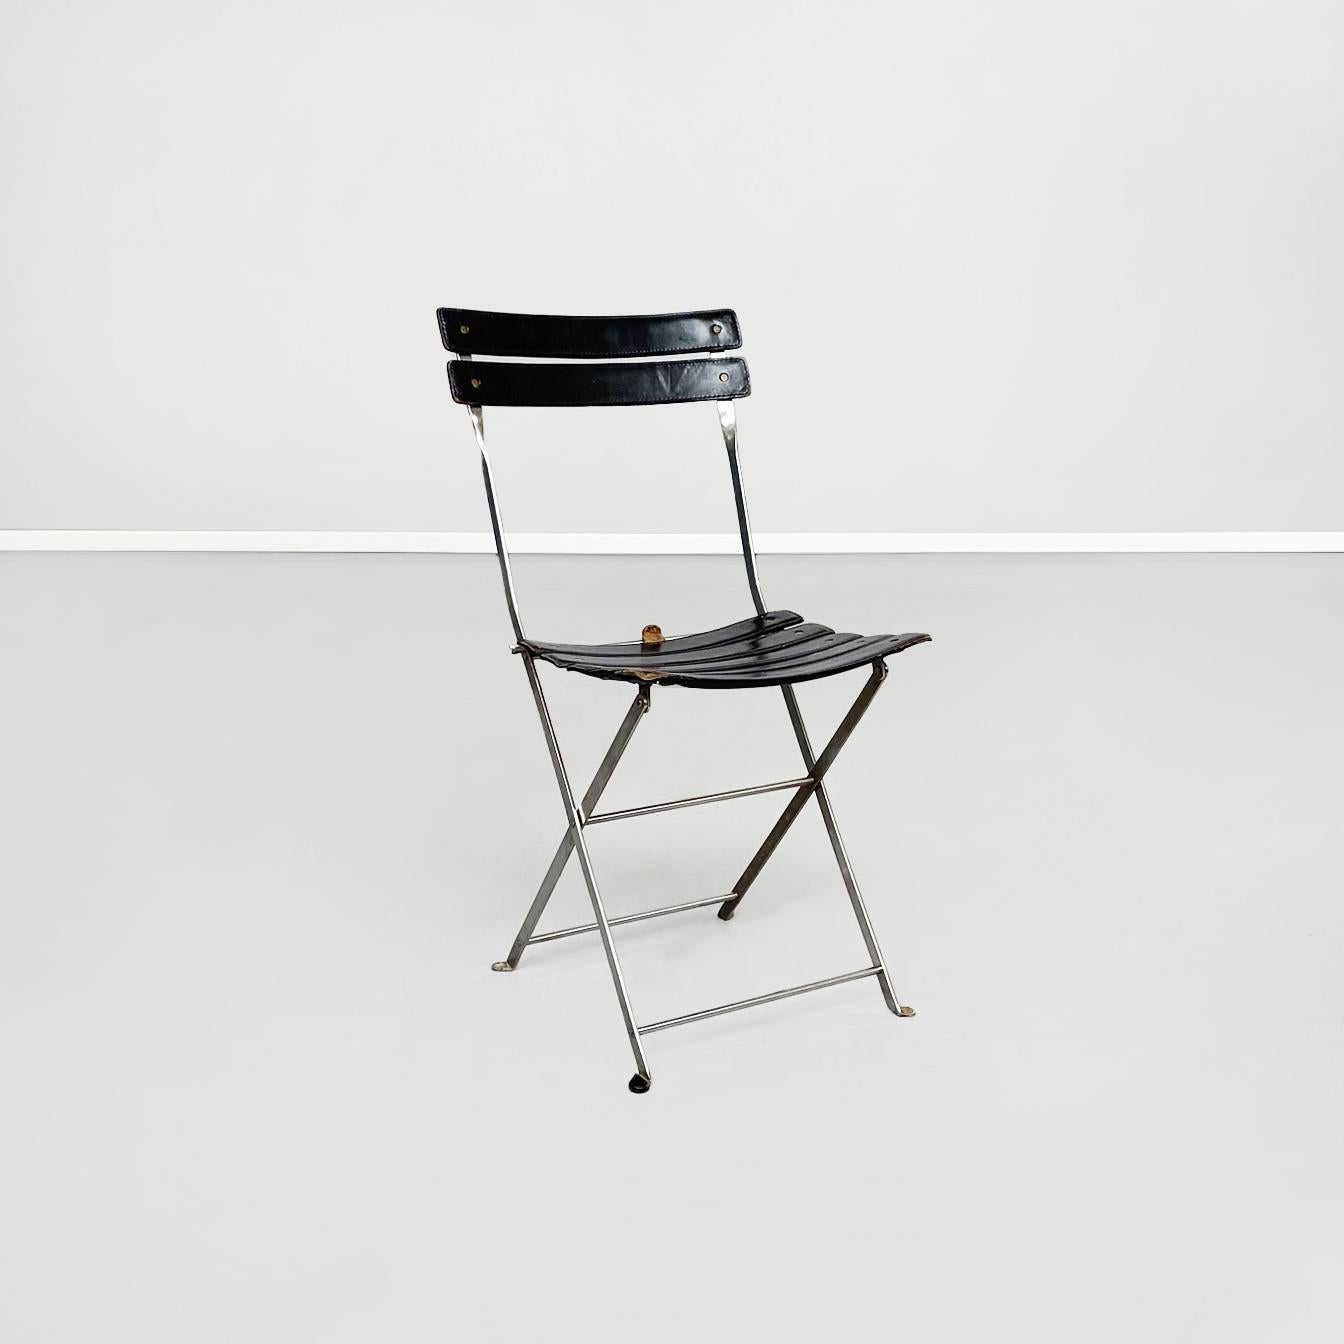 Italian mid-century Leather and steel Celestina chairs by Zanuso for Zanotta, 1978
Set of 8 chairs Celestina model, with rectangular seat and back in black leather. The seat and back are made up of a series of strips of black leather. The flat